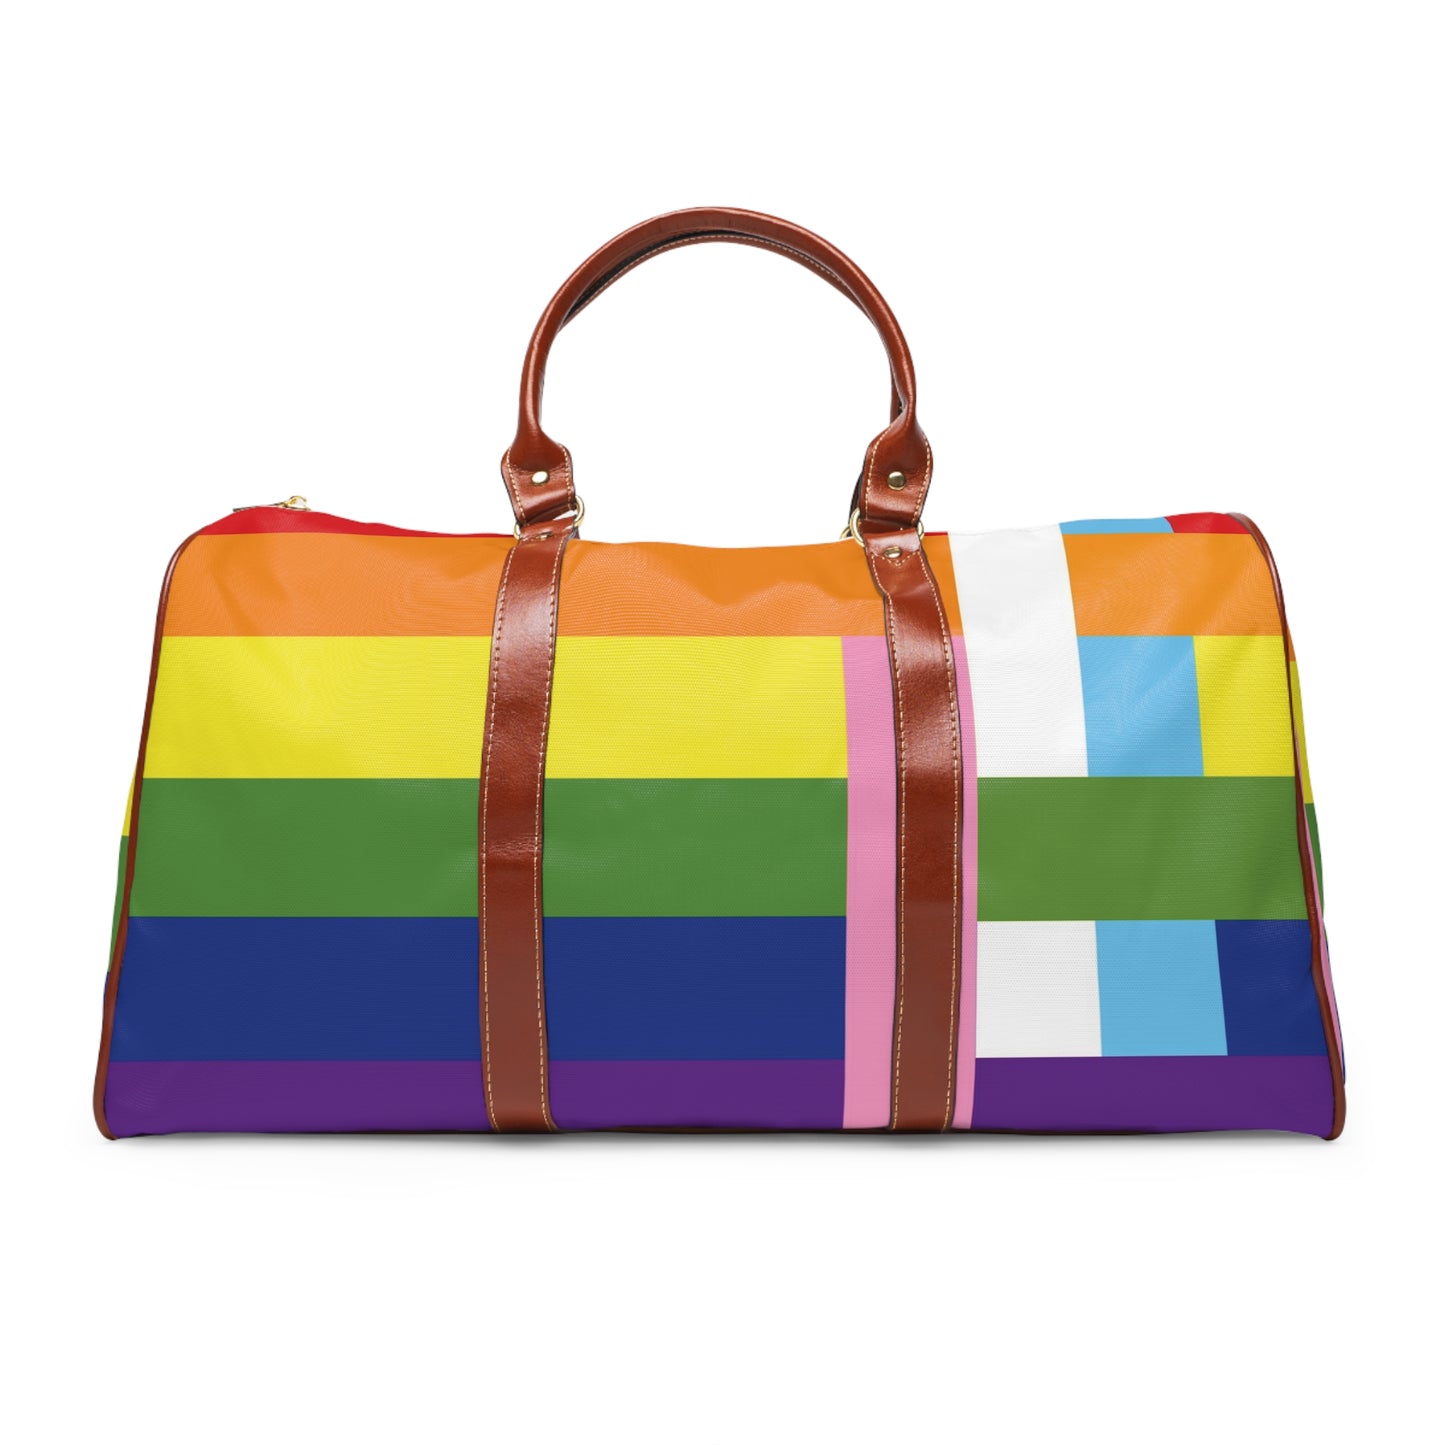 All in this together - Pride - Waterproof Travel Bag